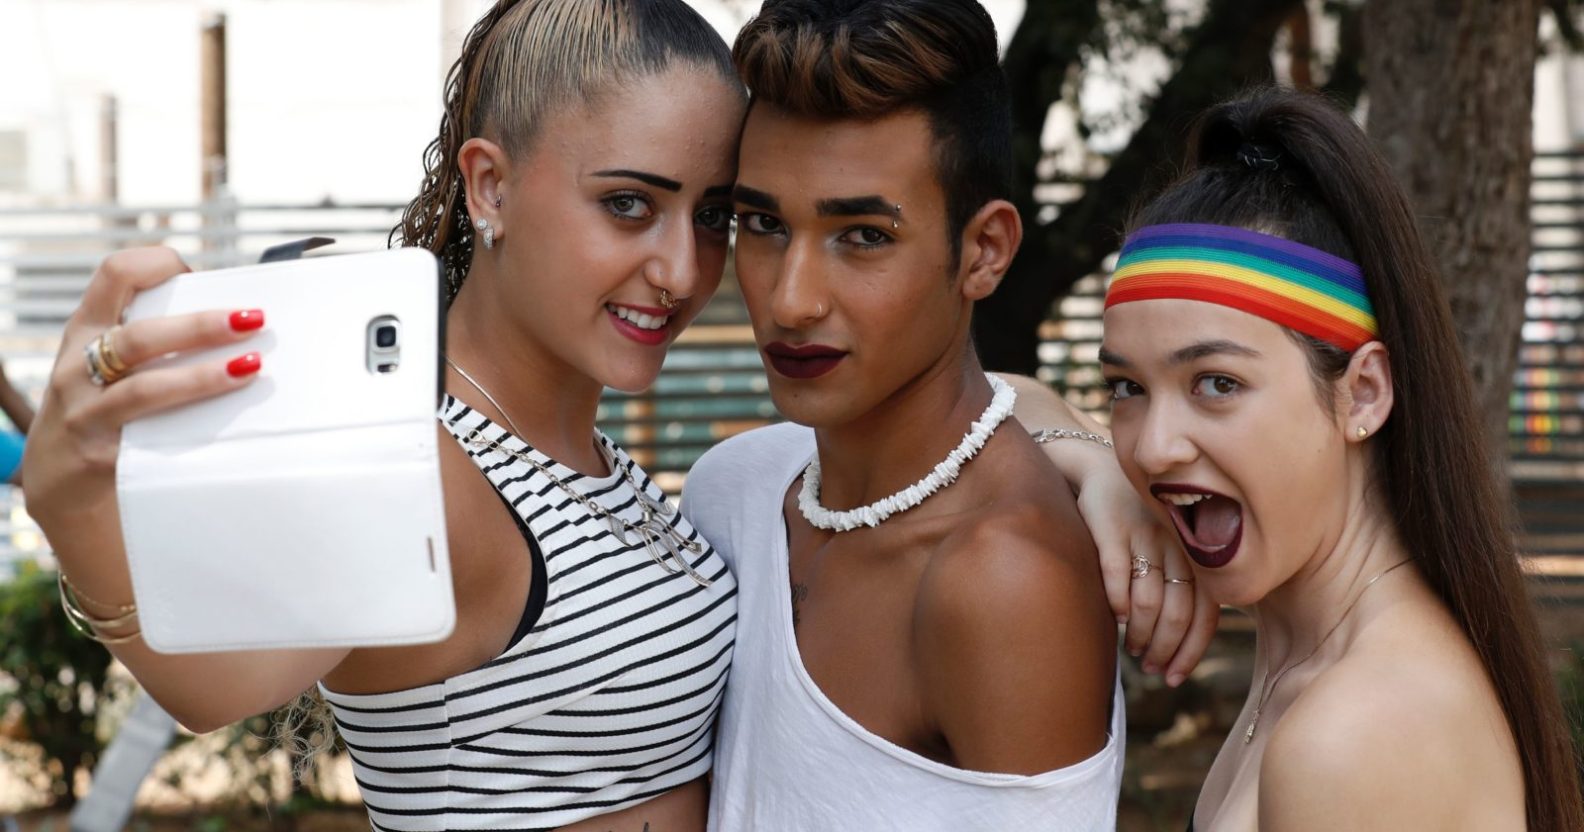 Participants use a phone to take a selfie at the opening event of the annual Gay Pride parade in the Israeli city of Tel Aviv, on June 3, 2016. A carefree and cosmopolitan crowd of tens of thousands of homosexuals, transsexuals and supporters took part it the Gay Pride in Tel Aviv, deemed one of the largest in the world where amid the crowd, tourists waved large flags of their country of origin to signify their presence in a city known as a rare oasis for LGBT (lesbian, gay, bi-sexual and transgender) in the Middle East. / AFP / JACK GUEZ (Photo credit should read JACK GUEZ/AFP/Getty Images)